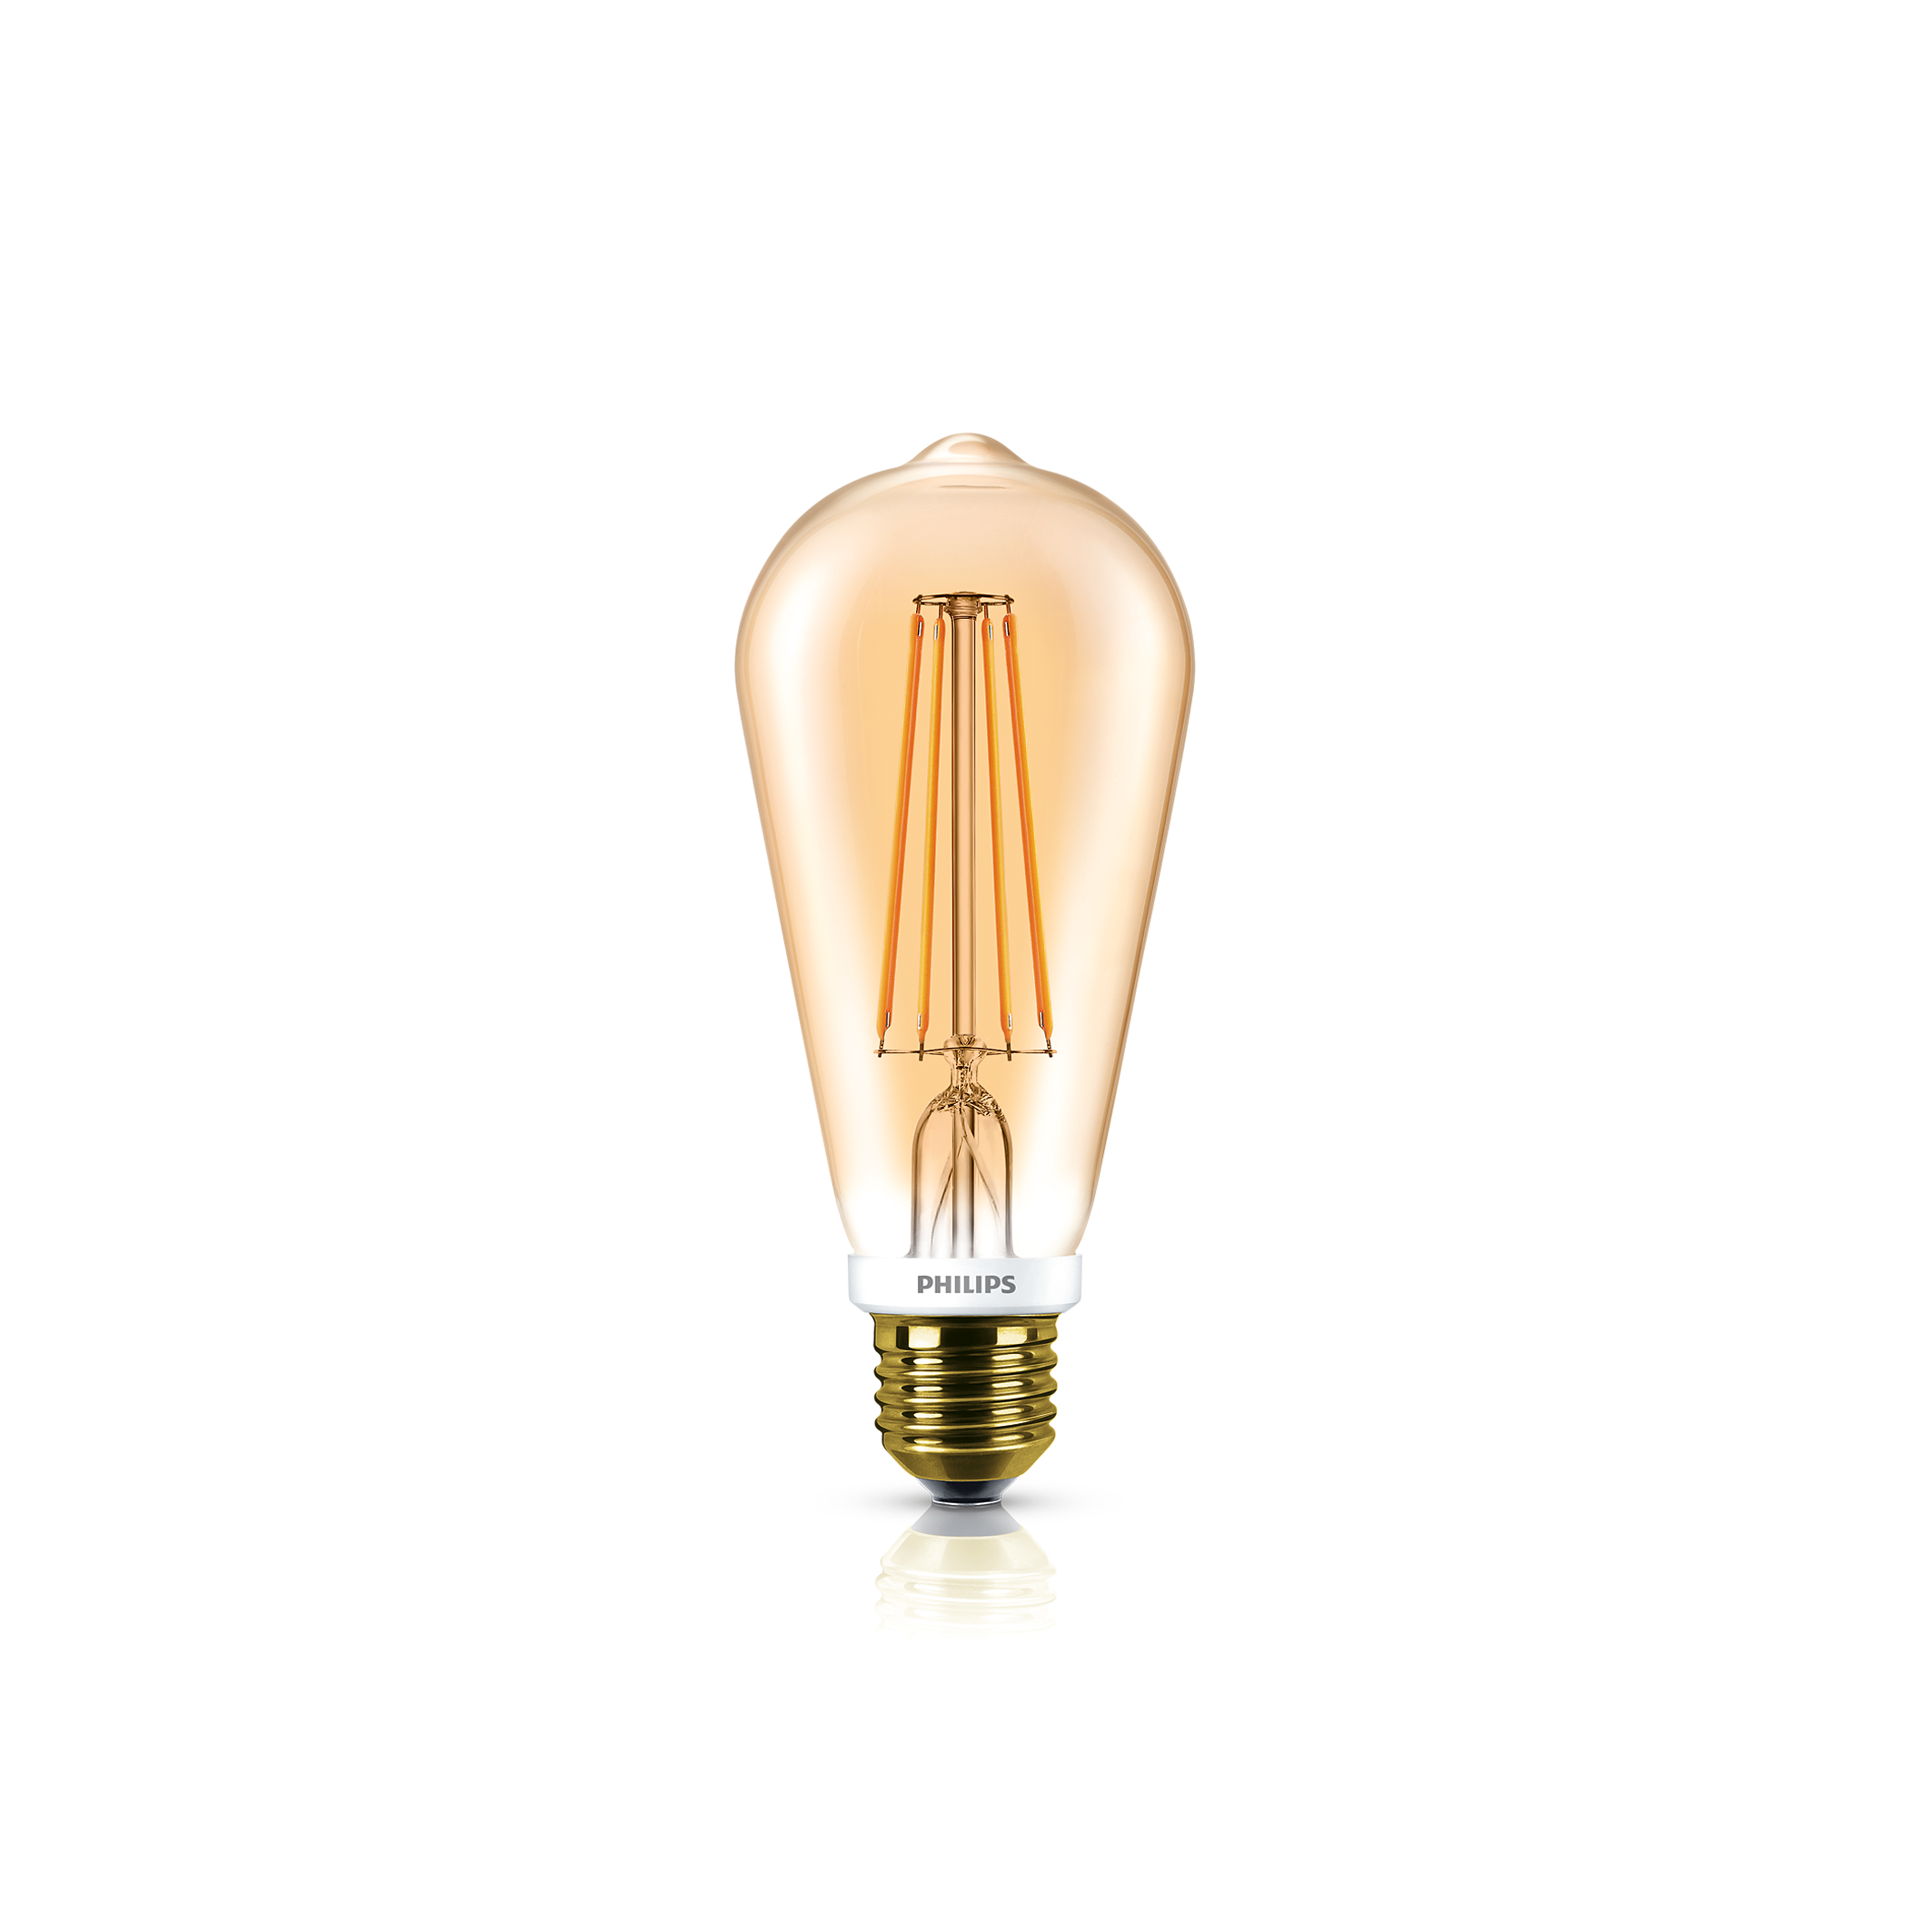 GogoTool Edison Vintage Light Bulb 40W E27 2700-2900K Dimmable 340LM Retro Vintage Antique Light Bulb Ideal for Nostalgia and Retro Lighting in The House Café Bar etc Pack of 6